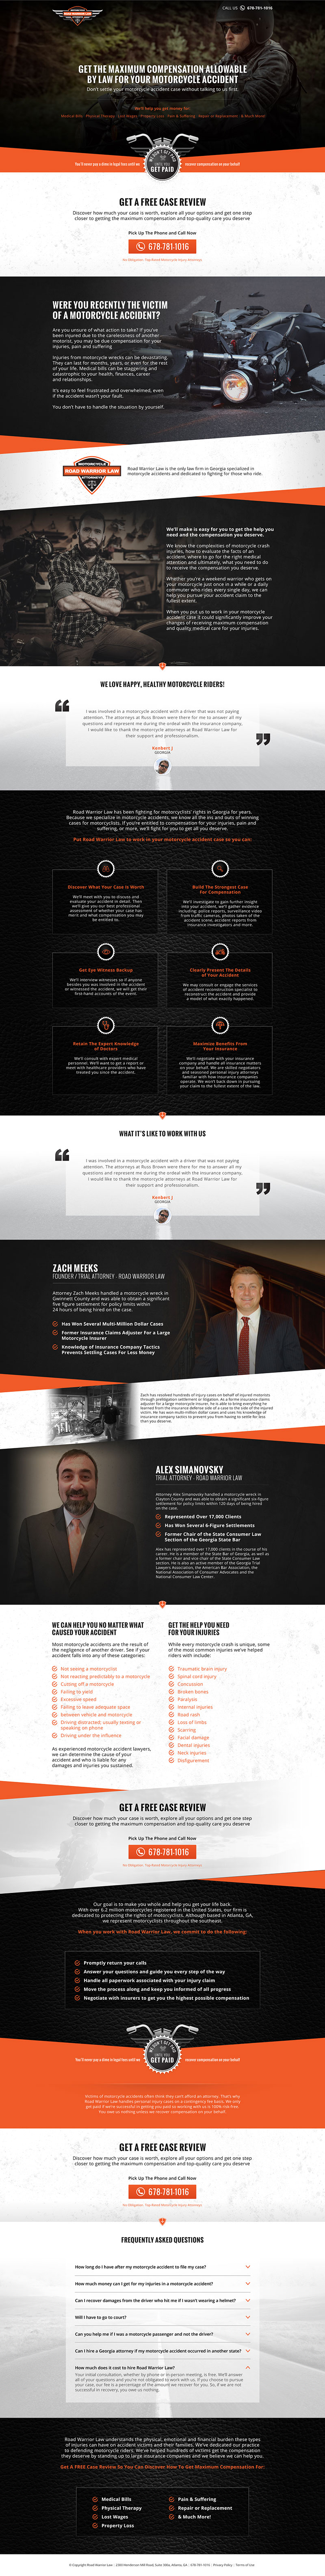 ROAD-WARRIOR-LAW-LANDING-PAGE-1